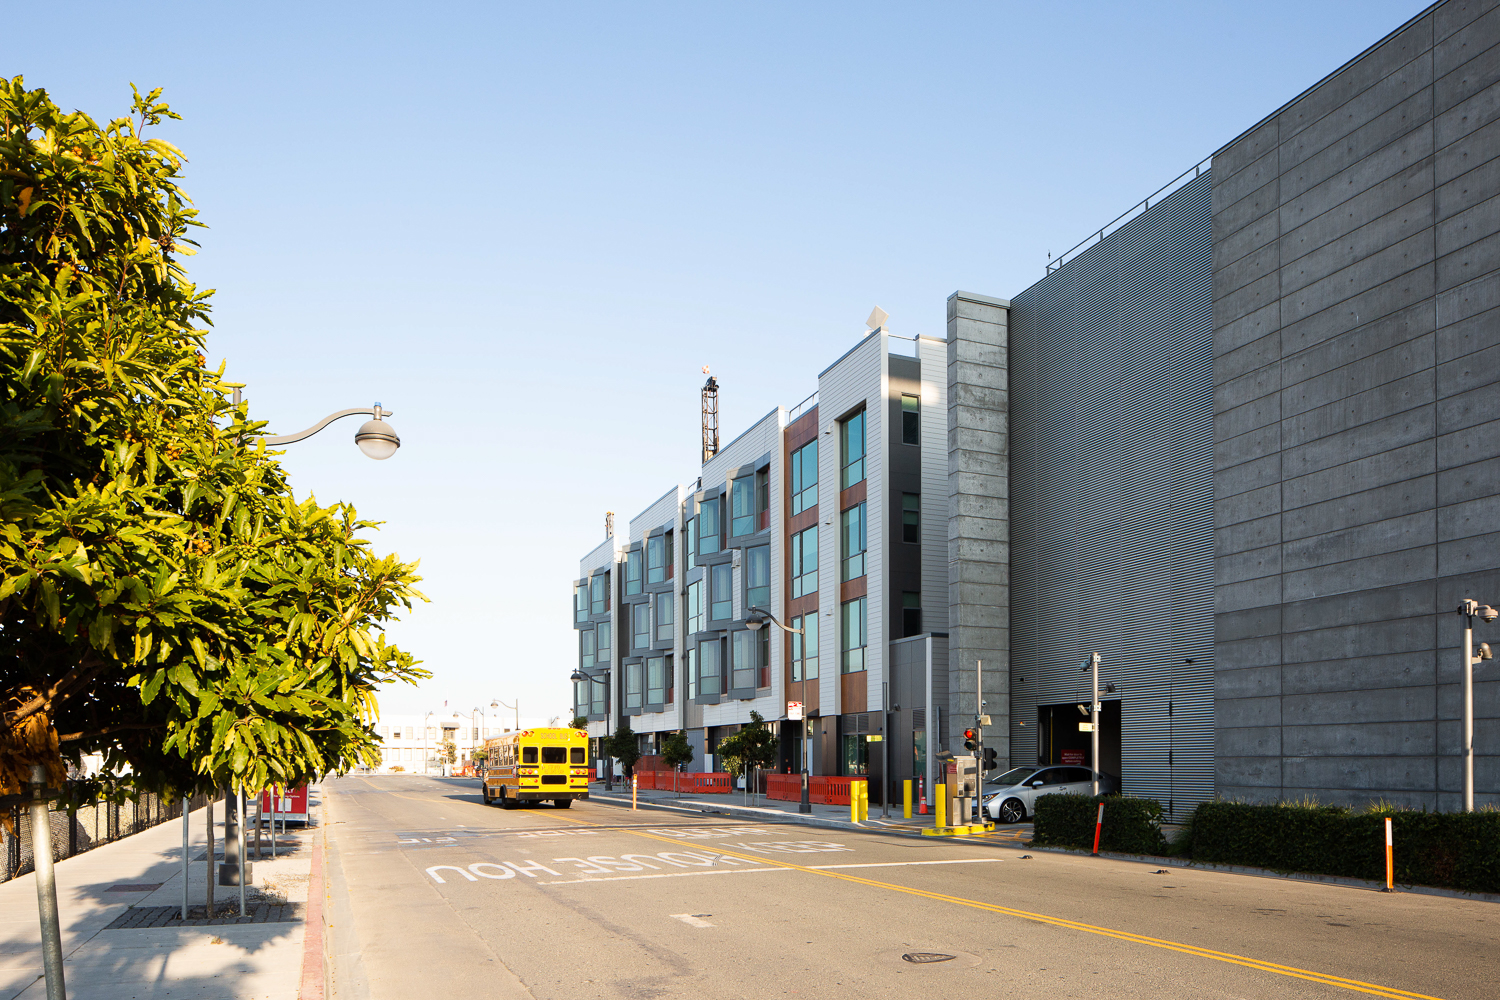 Mission Bay Block 9 facade installation underway, image by Andrew Campbell Nelson